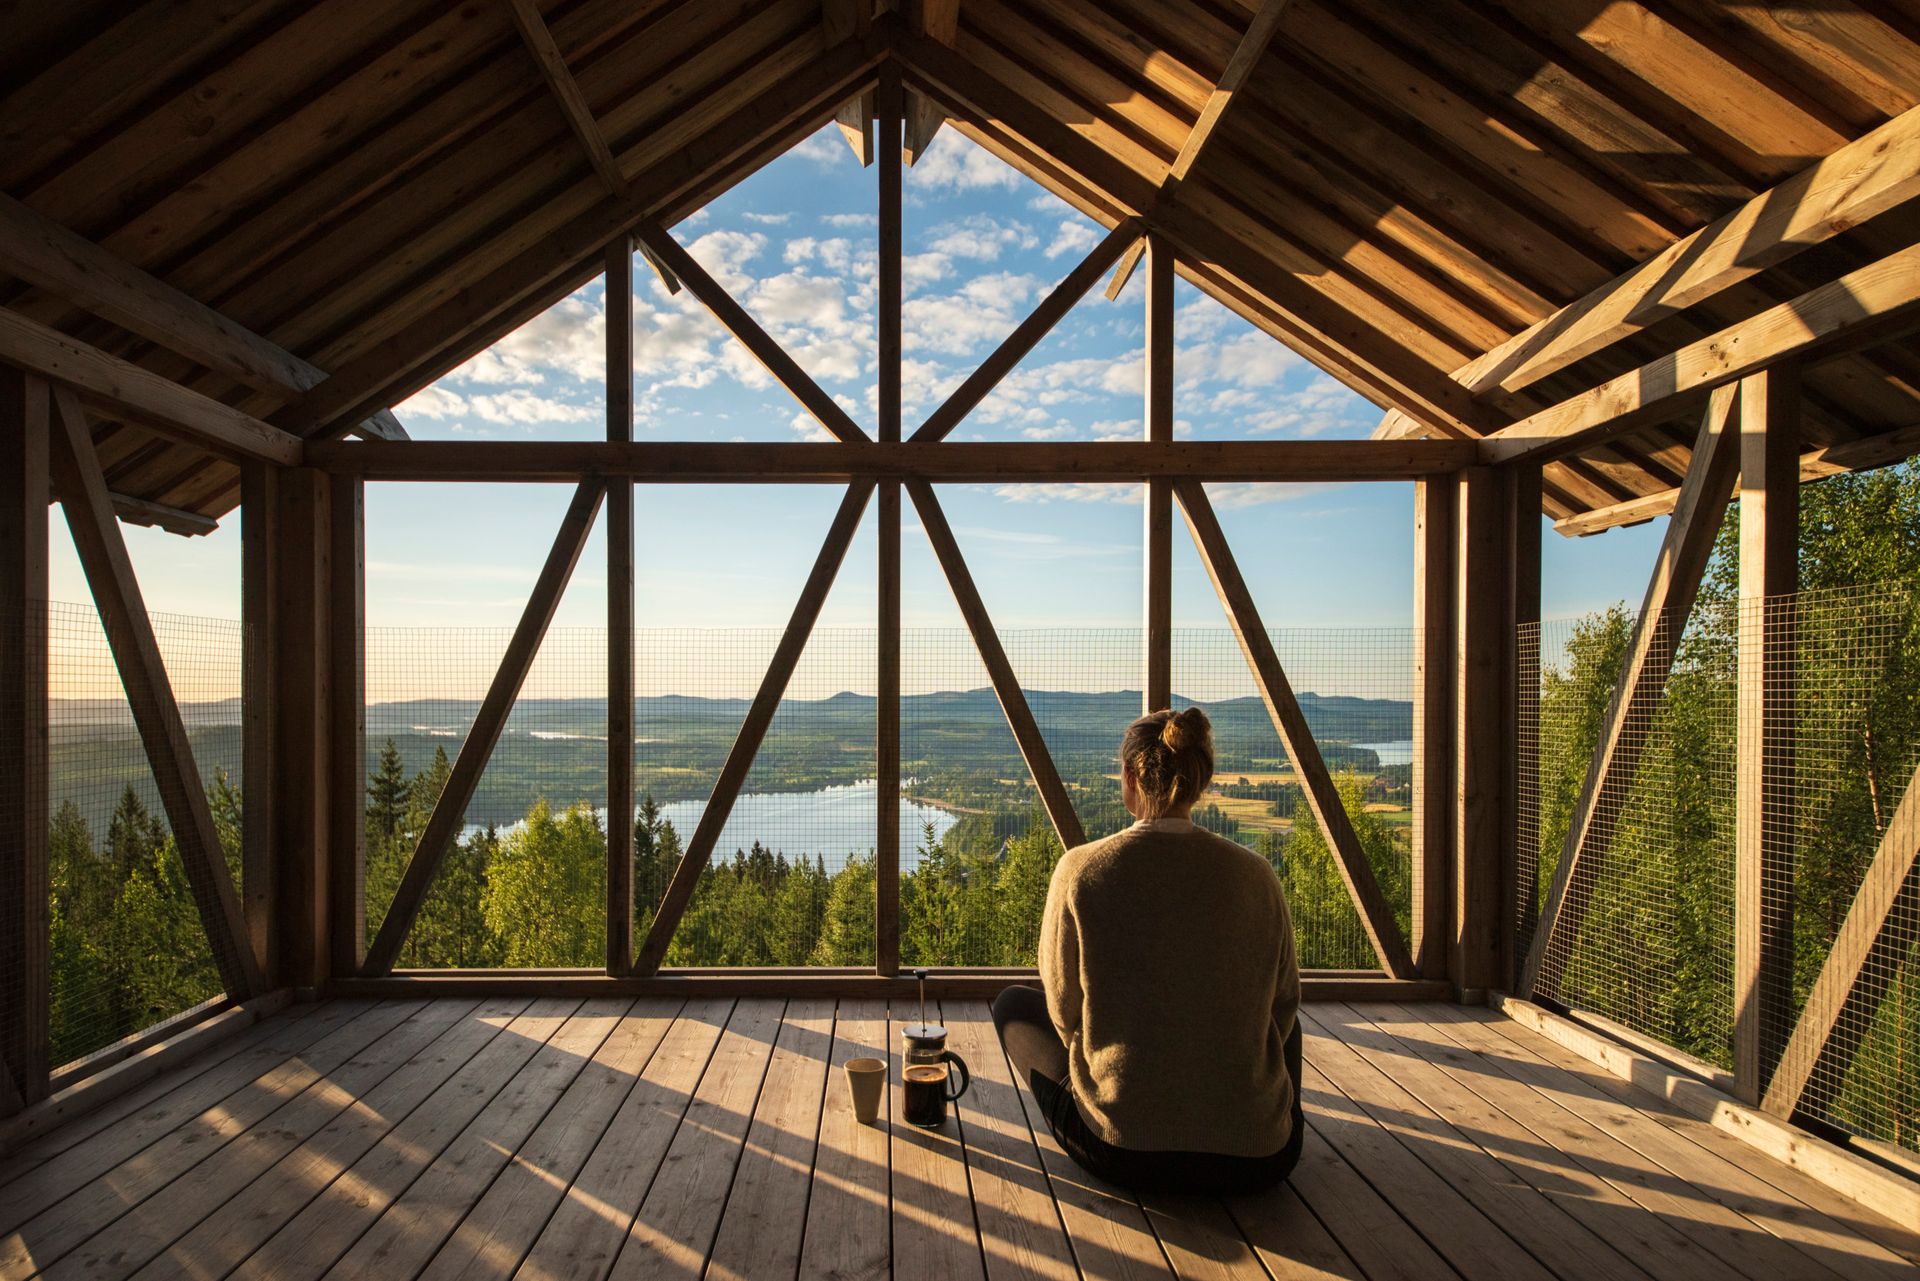 A person sitting inside a wooden construction amongst the treetops a Swedish forrest looking at the view.